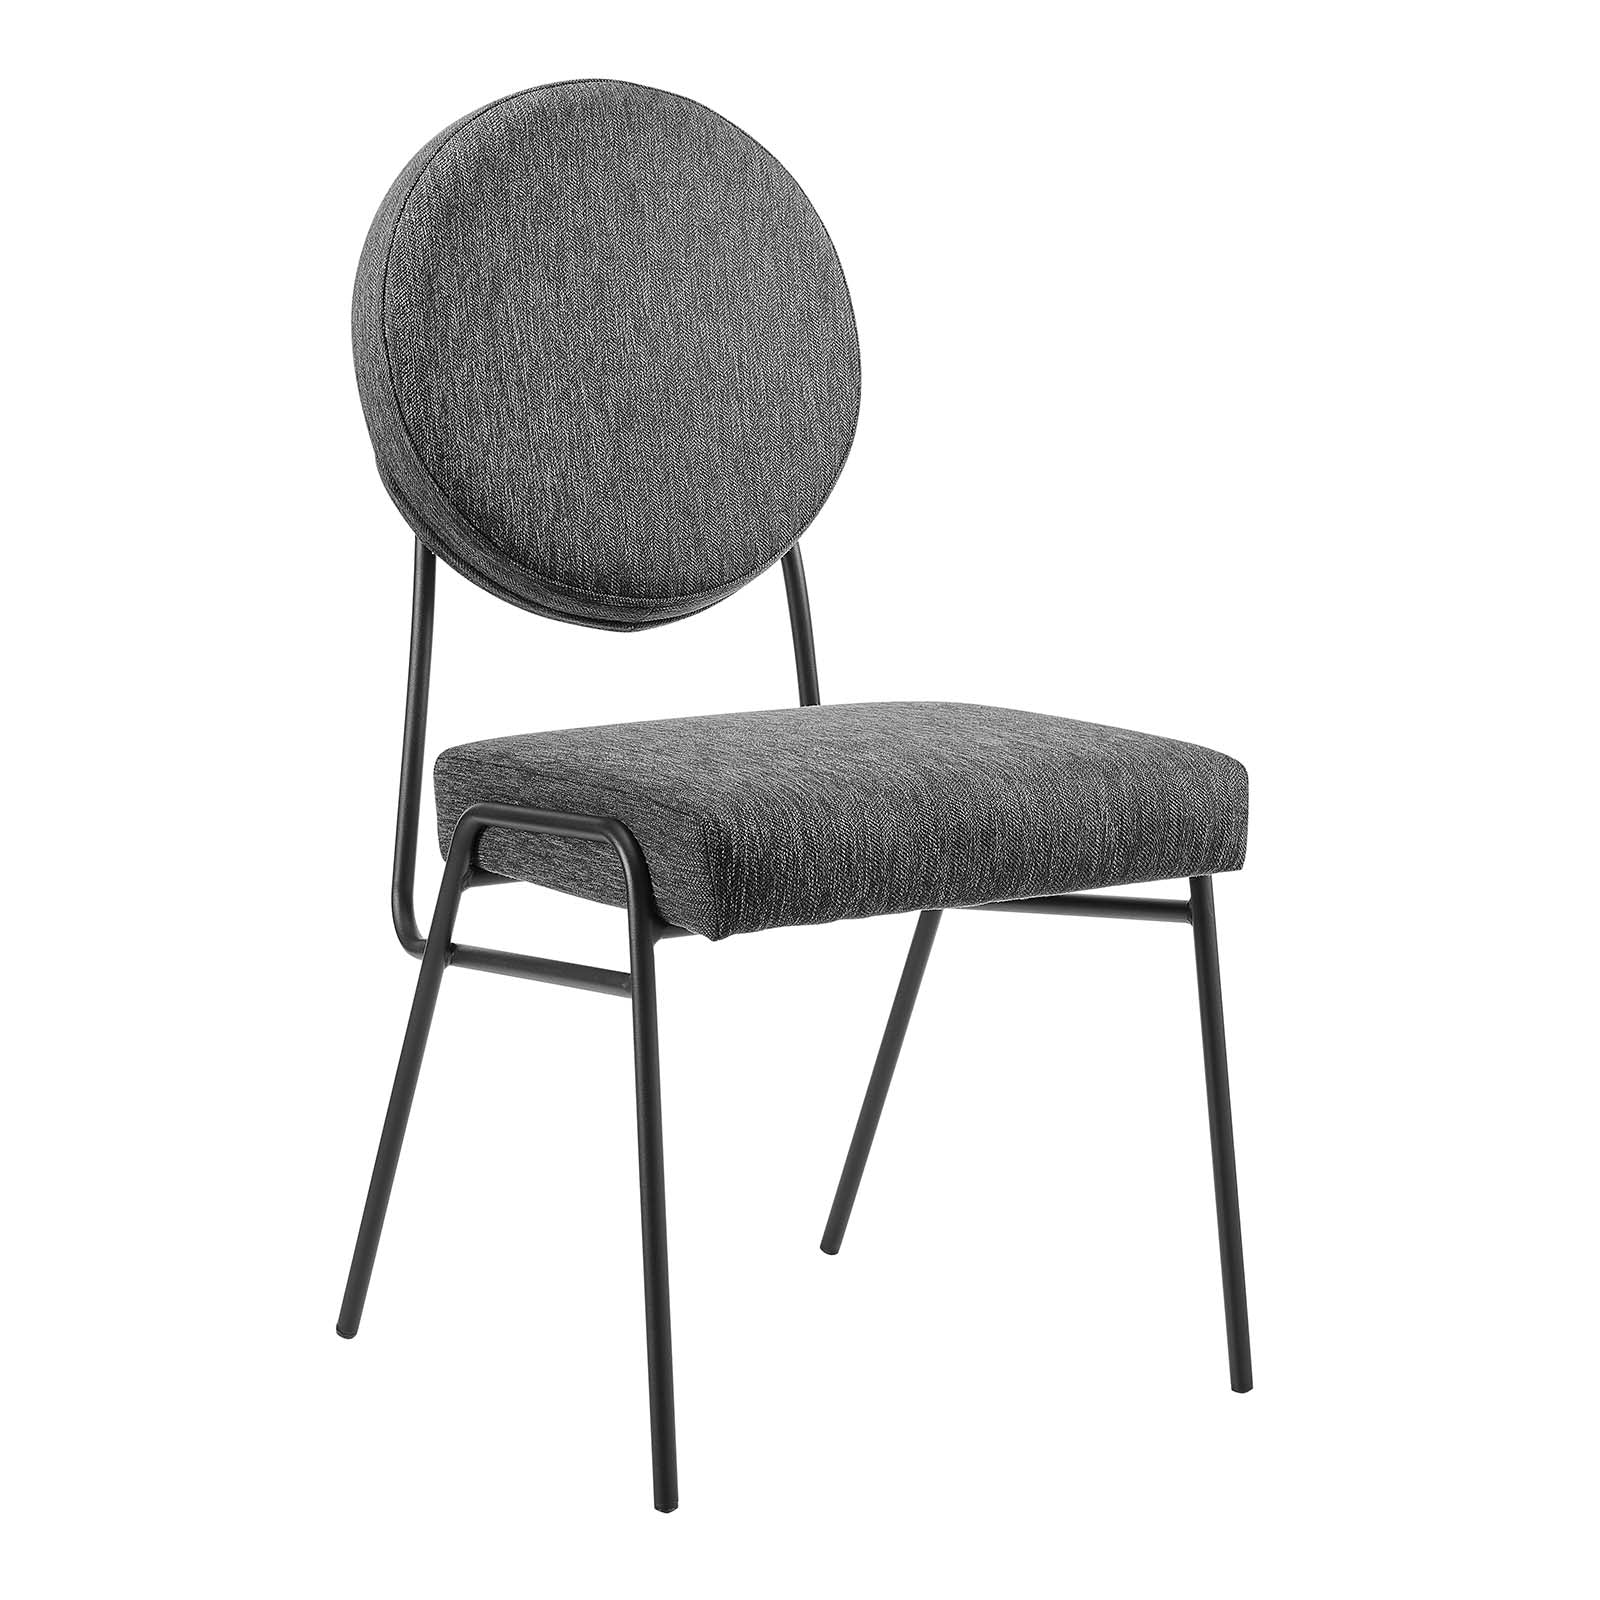 Craft Upholstered Fabric Dining Side Chairs - Set of 2 - East Shore Modern Home Furnishings